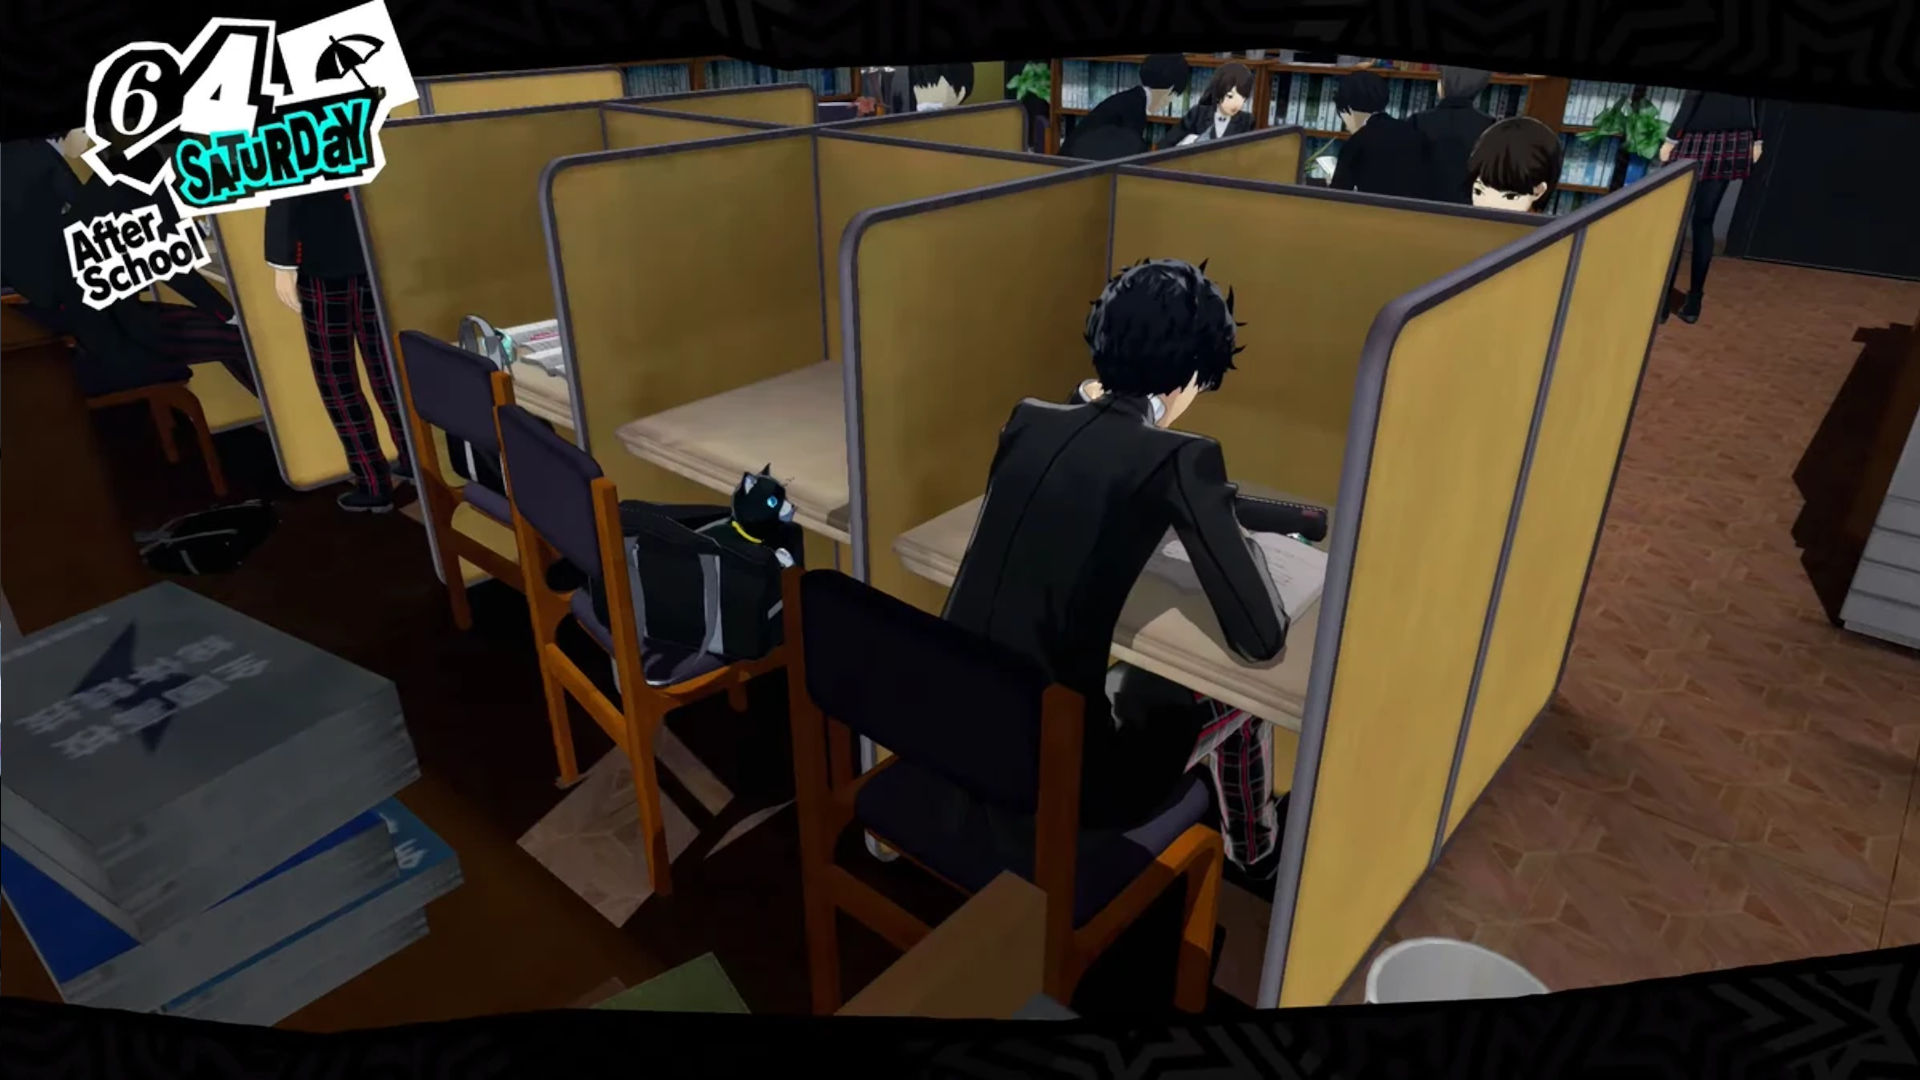 Persona 5 answers; protagonist studying